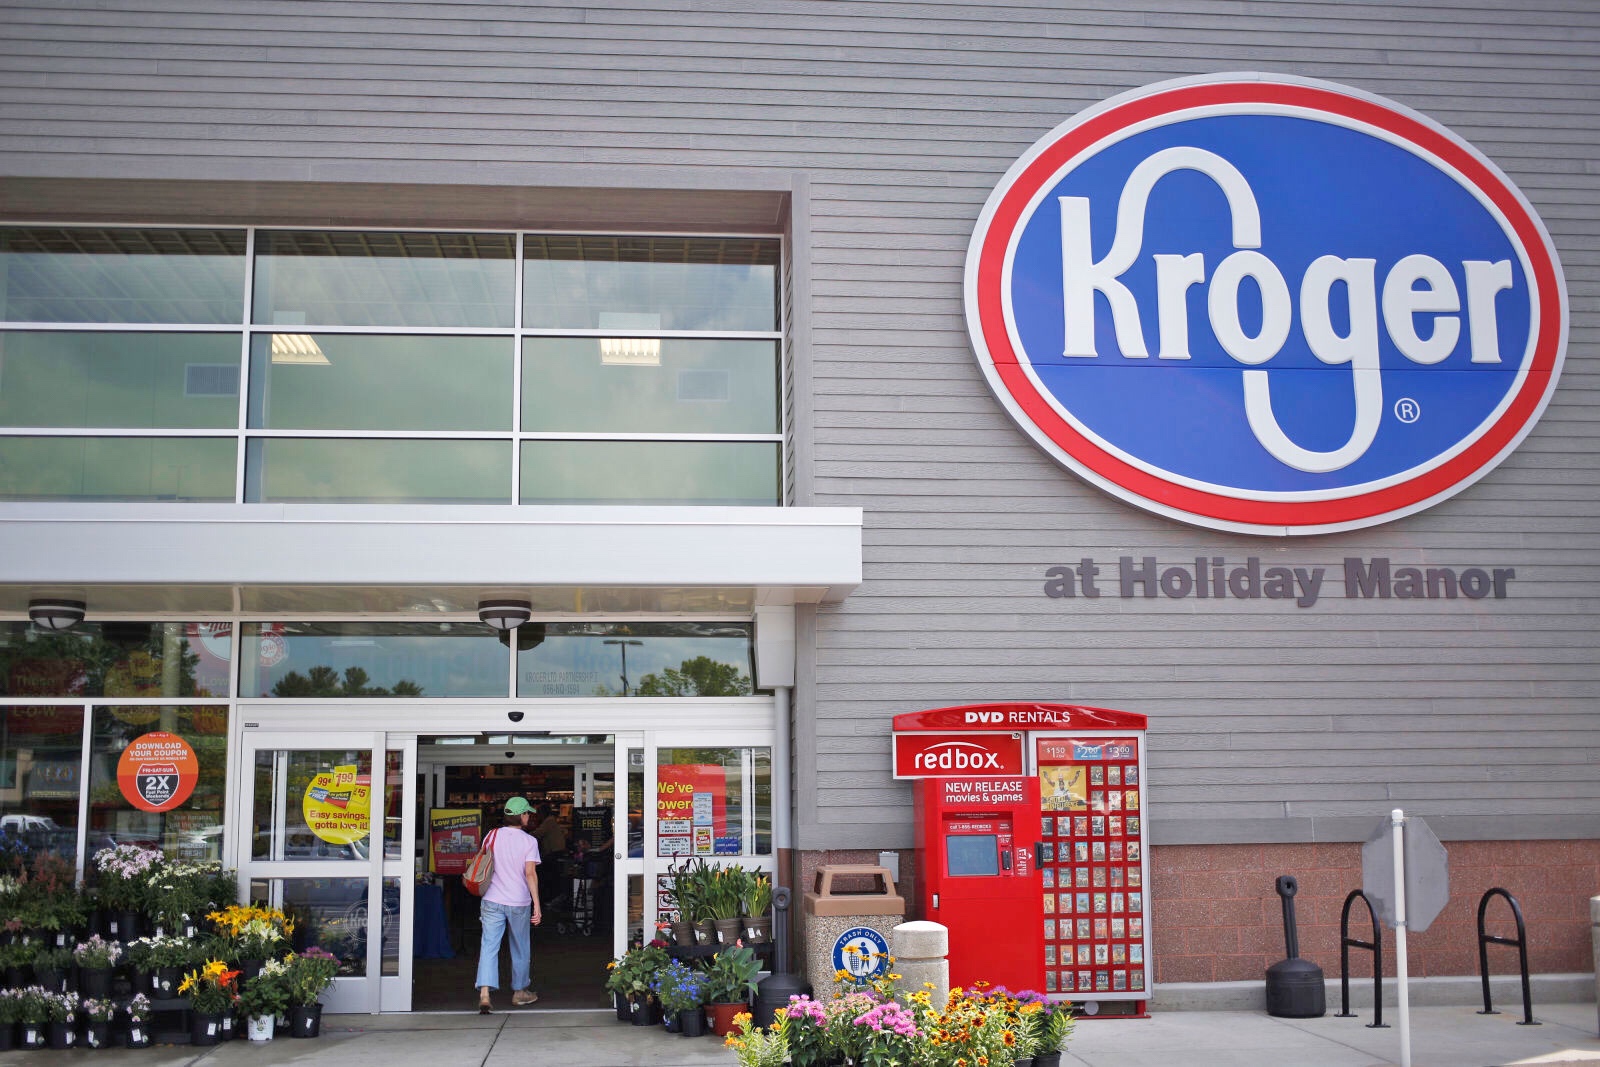 Kroger is expanding its self-checkout tech in hopes to cut checkout lines